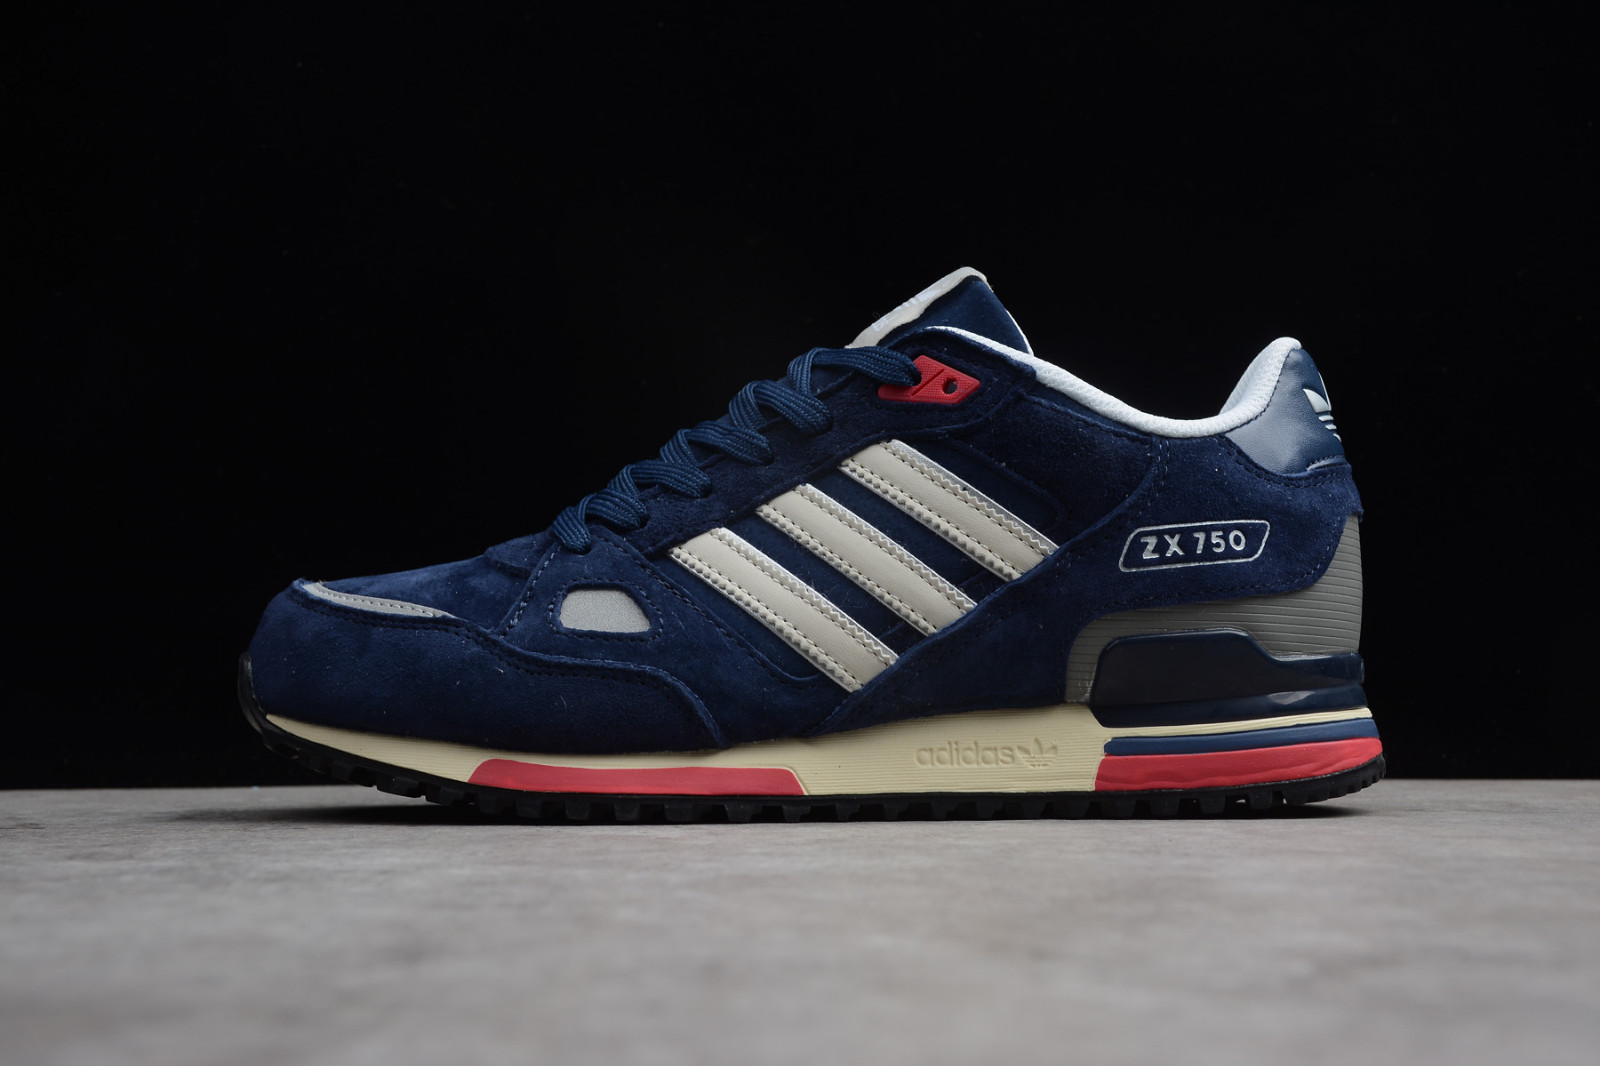 holiday-themed running workouts Sepsale - Adidas Originals ZX 750 Navy Blue Cloud White Shoes Q35065